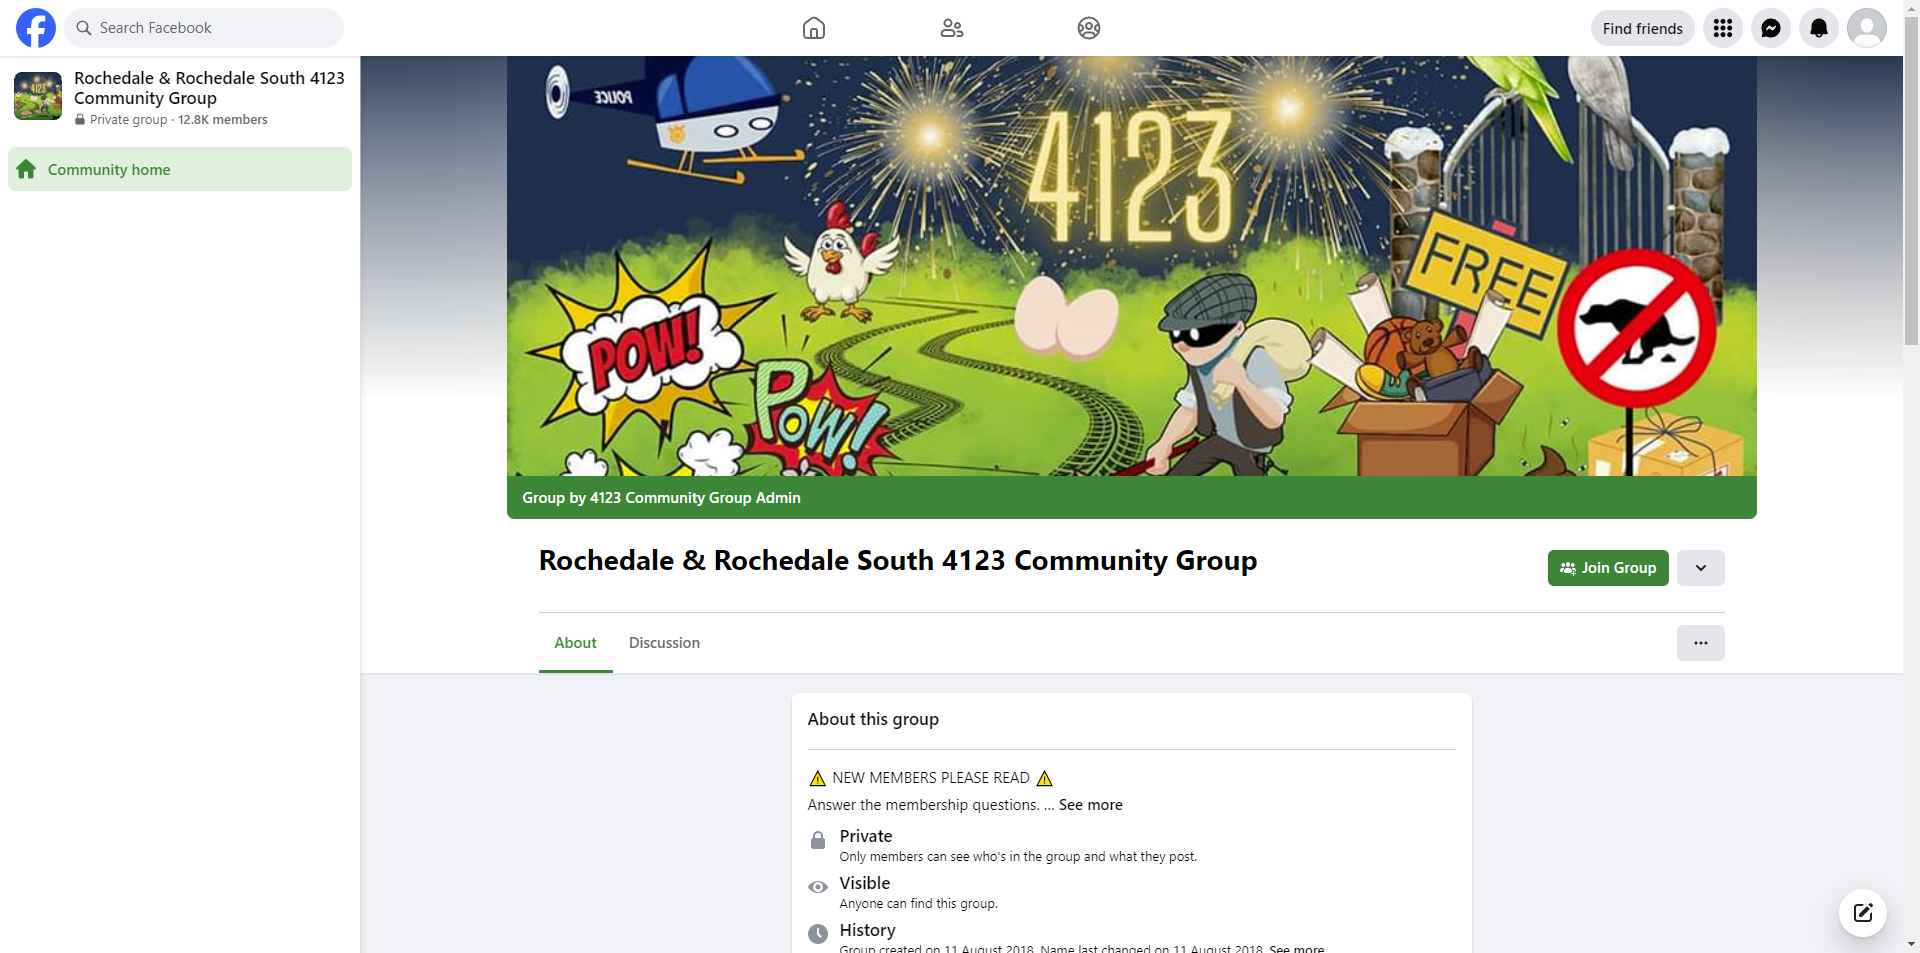 Rochedale & Rochedale South 4123 Community Group